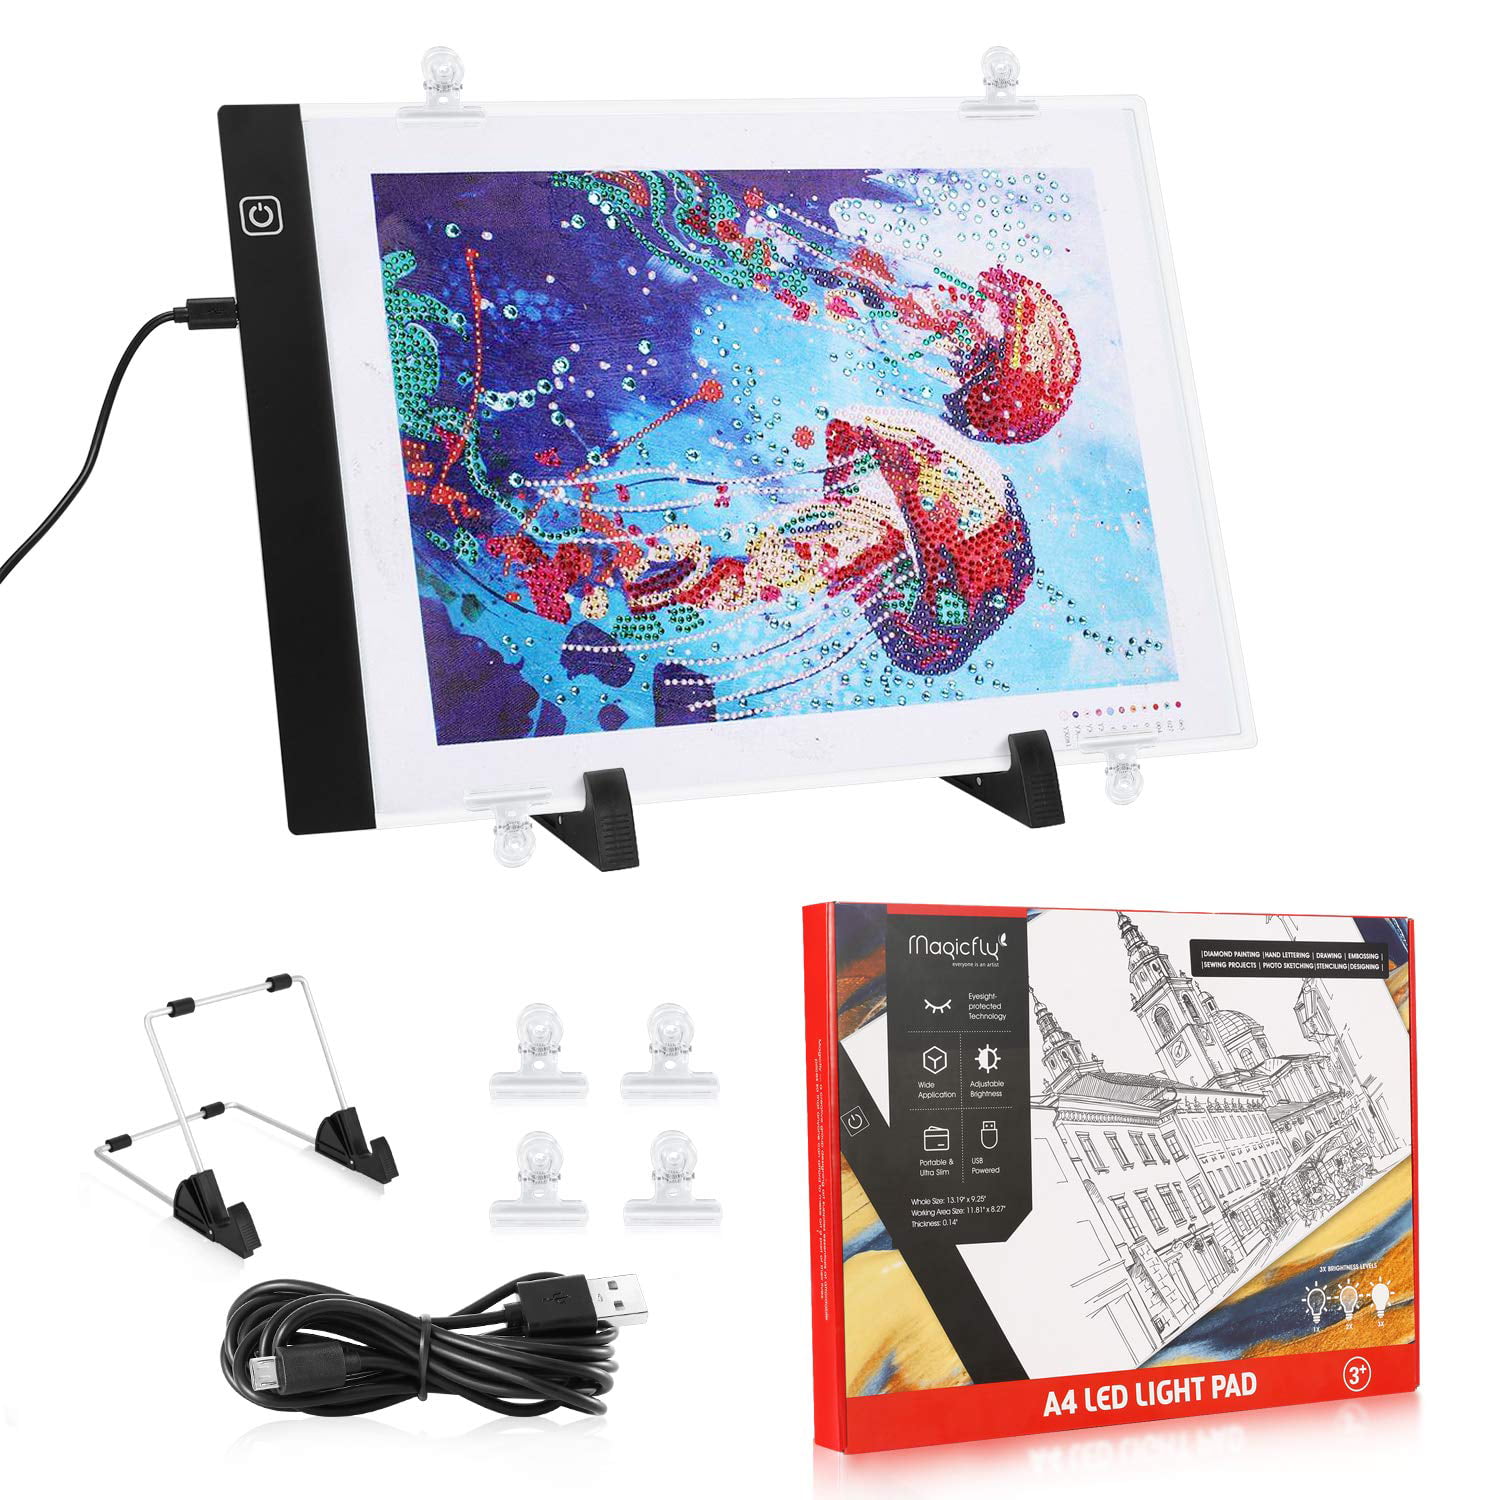 XEUYUTR Diamond Painting Accessories with A4 LED Light Pad and Professional Tray Organizer Apply to Full Drill & Partial Drill 5D Diamond Painting Kits for Adults Dimmable Light Brightness Board 